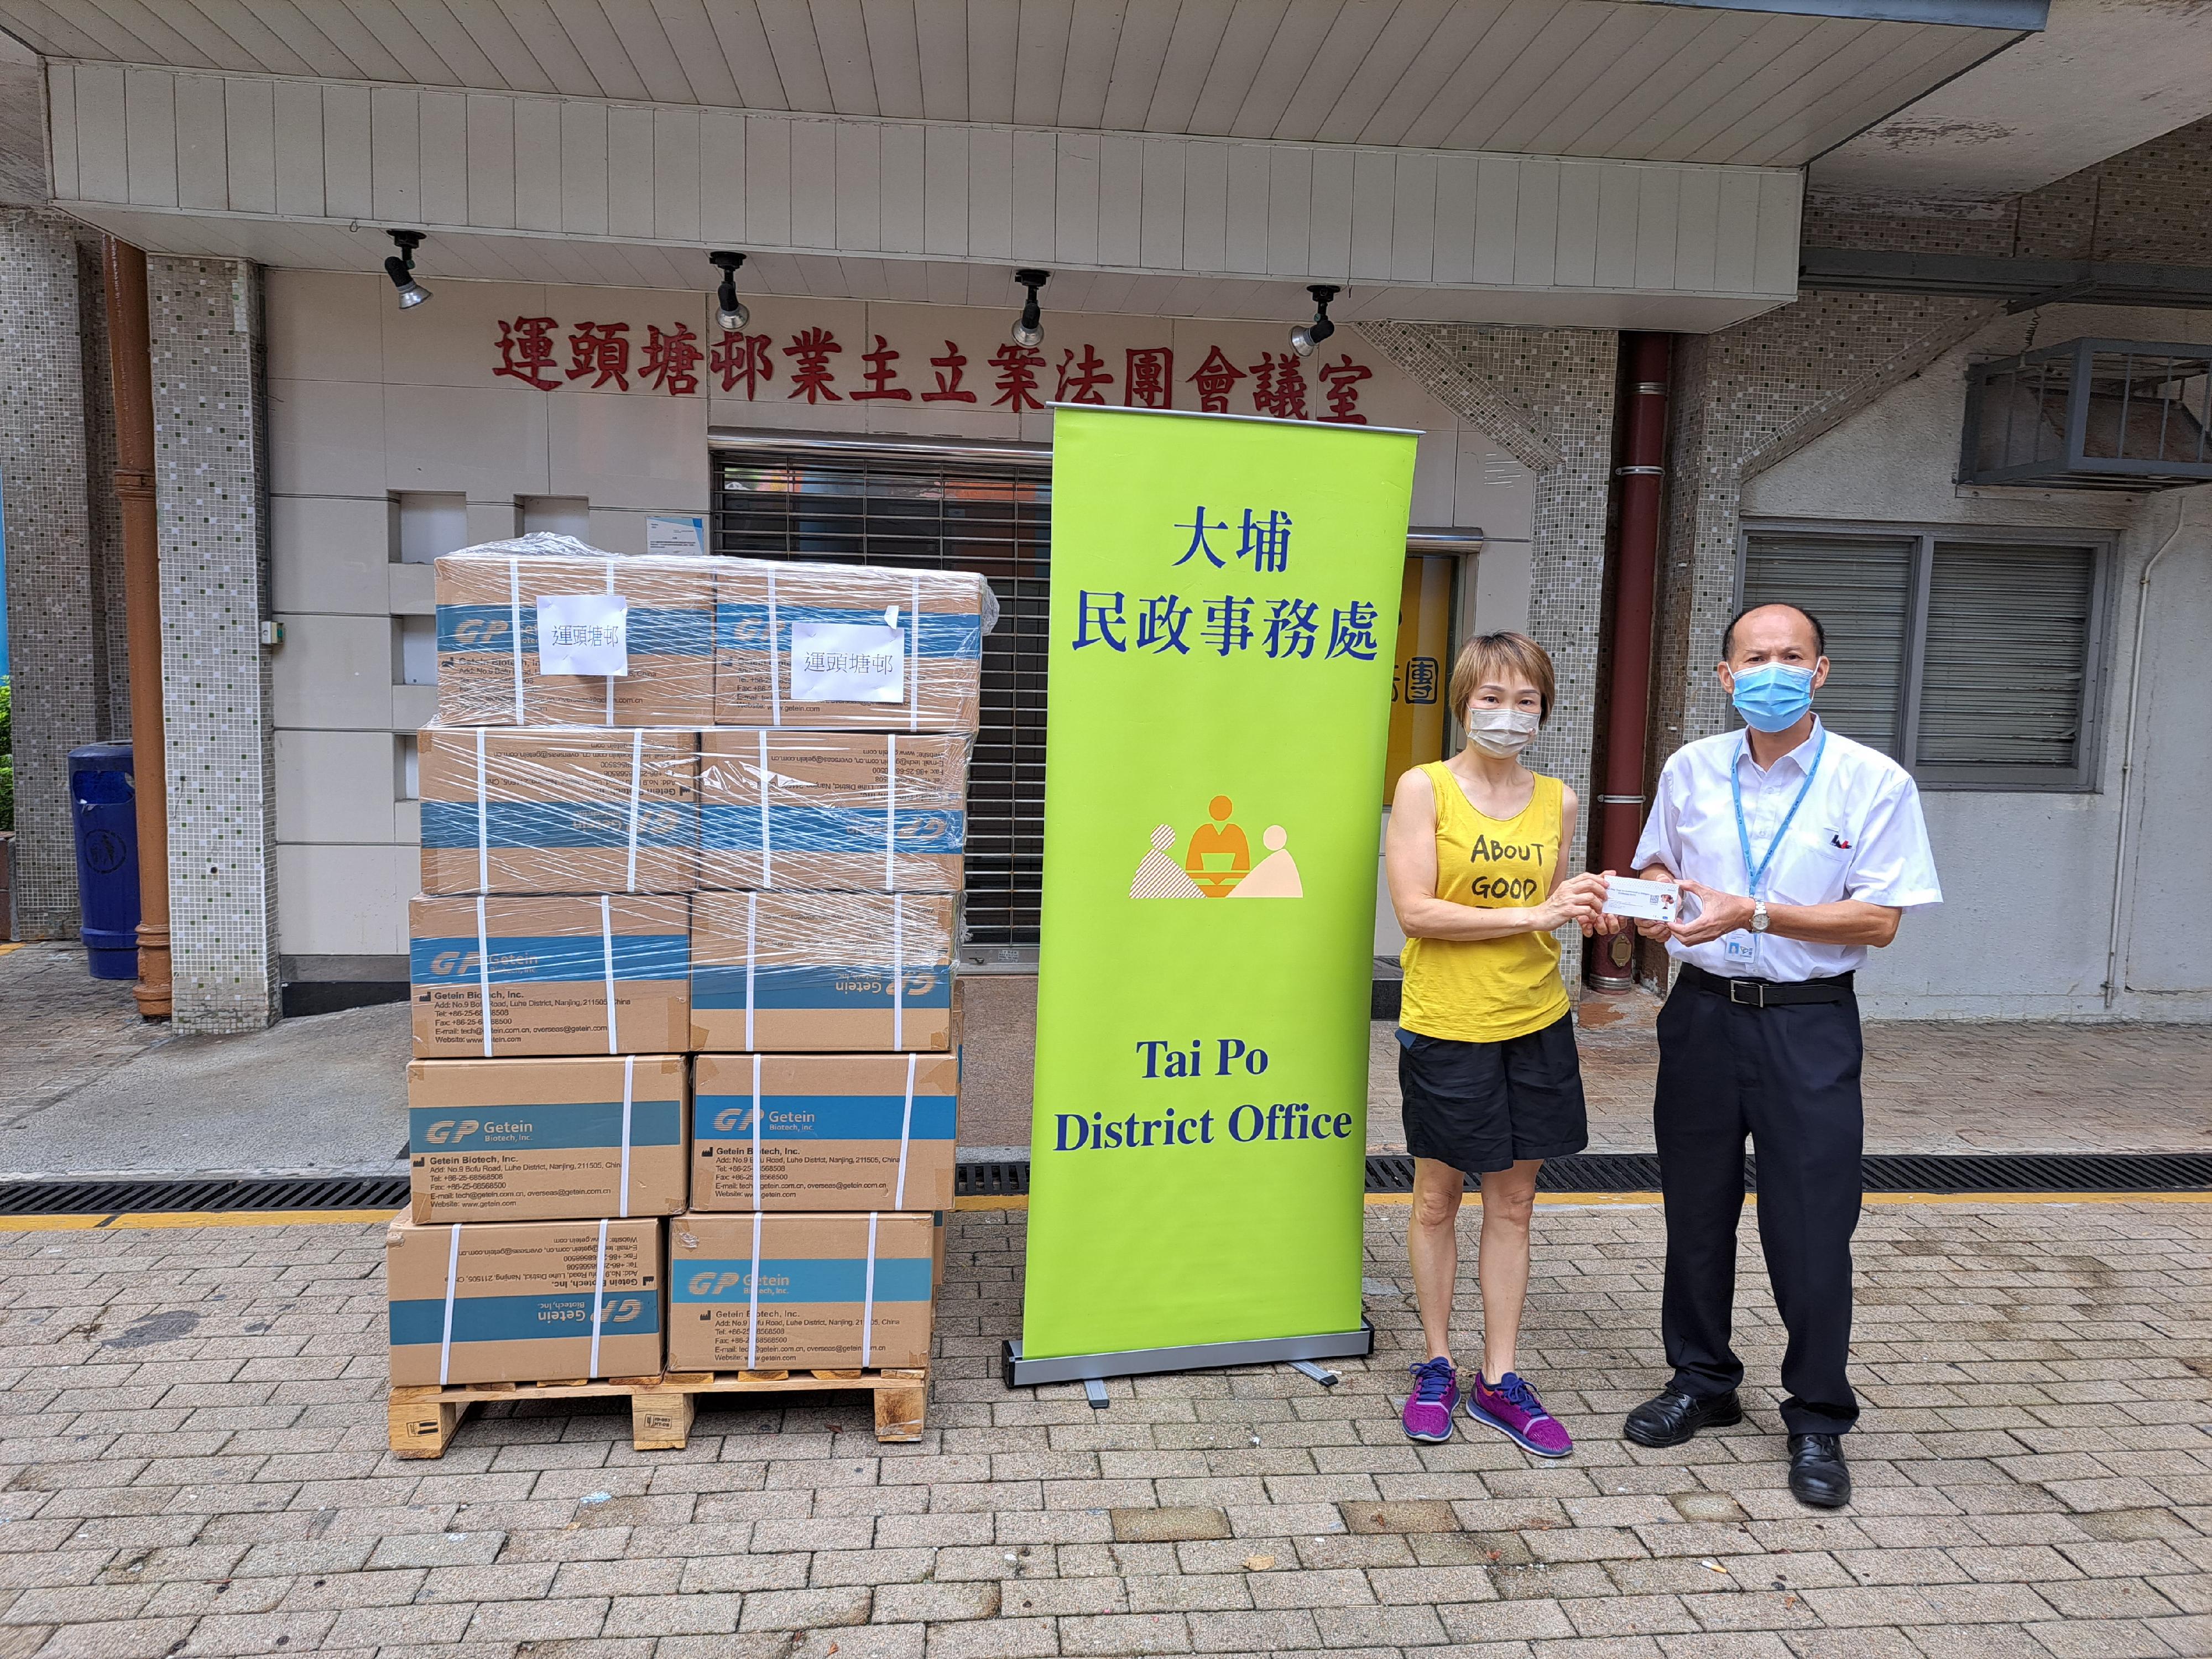 The Tai Po District Office today (July 21) distributed COVID-19 rapid test kits to households, cleansing workers and property management staff living and working in Wan Tau Tong Estate for voluntary testing through the property management company.